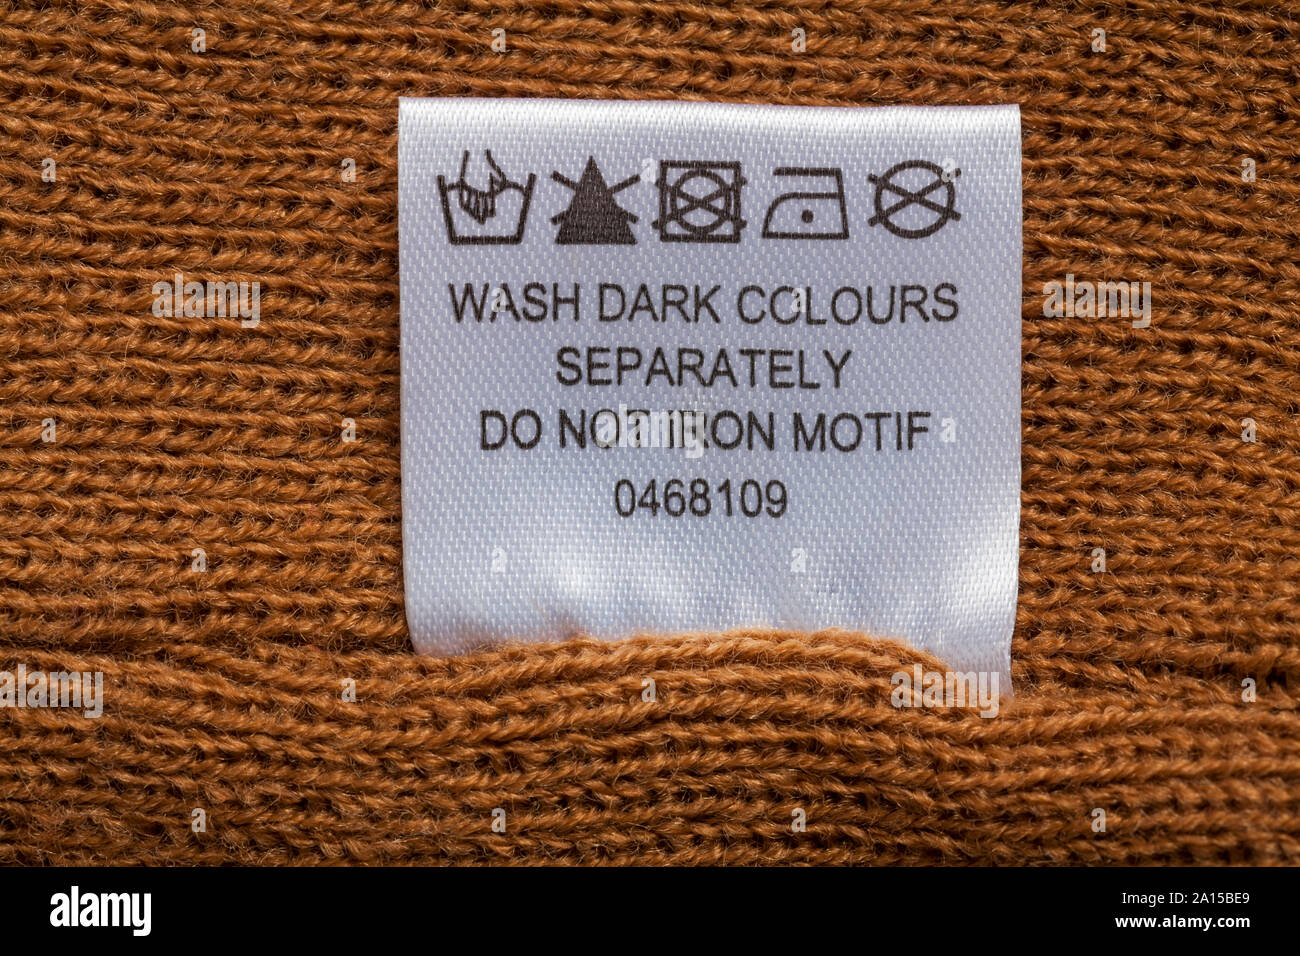 wash dark colours separately do not iron motif label in clothing - Care washing symbols and instructions Stock Photo